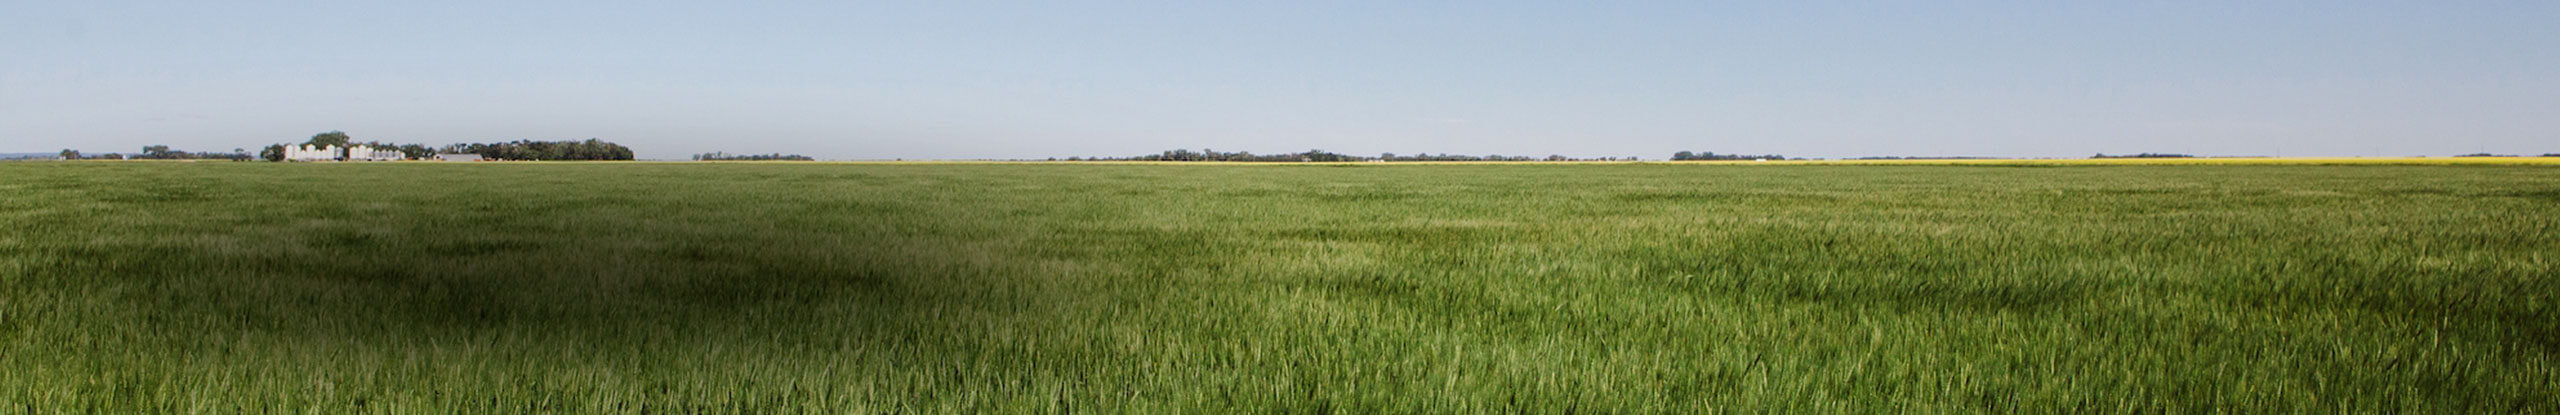 Rotational effects and optimized plant spatial arrangement for wheat production in Manitoba